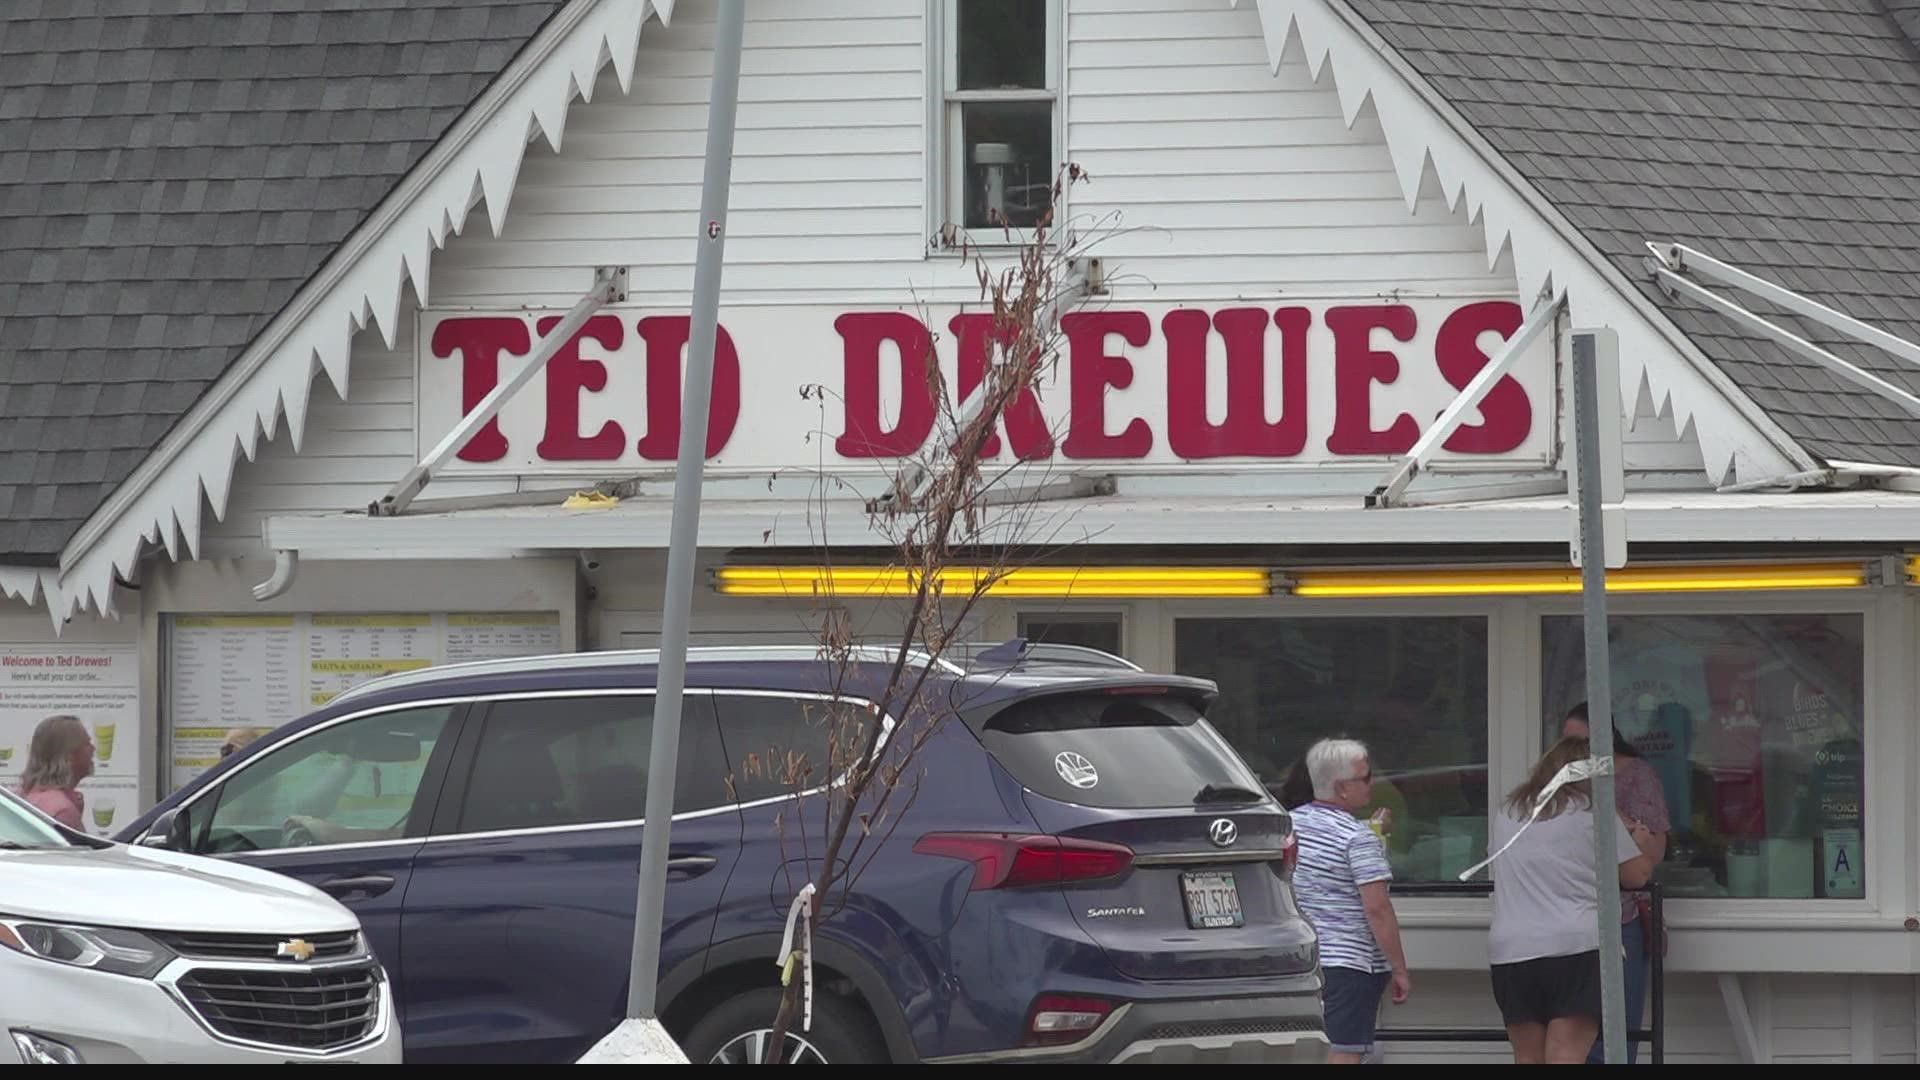 Matthew Nikolai, 17, is the second person to be hit and killed outside of the Ted Drewes location this year. Neighbors along Chippewa Street are calling for change.